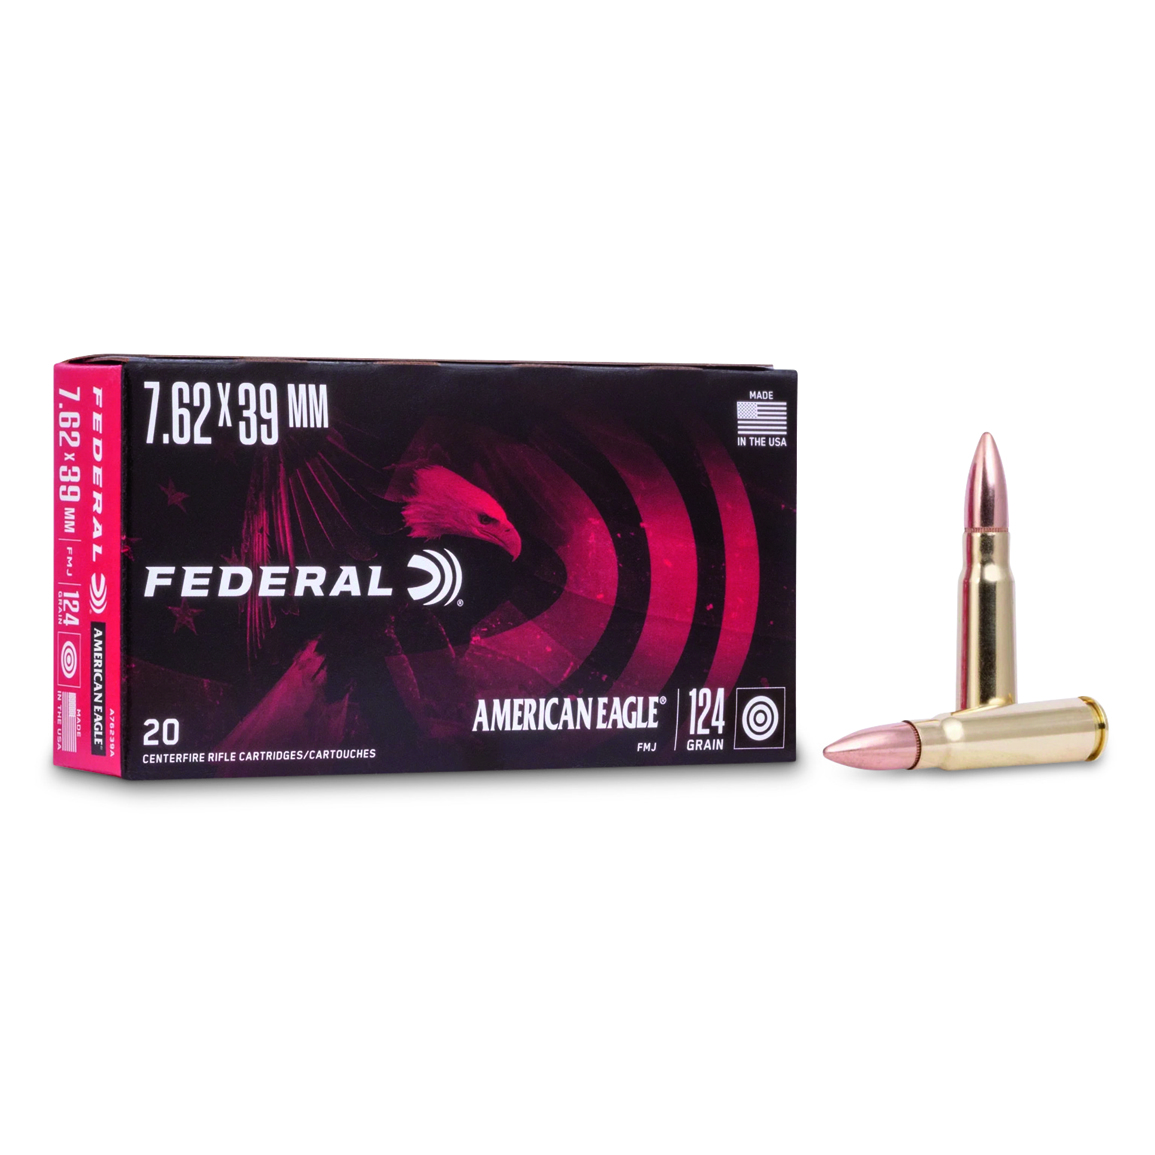 Federal American Eagle, 7.62x39mm, FMJ, 124 Grain, 20 Rounds